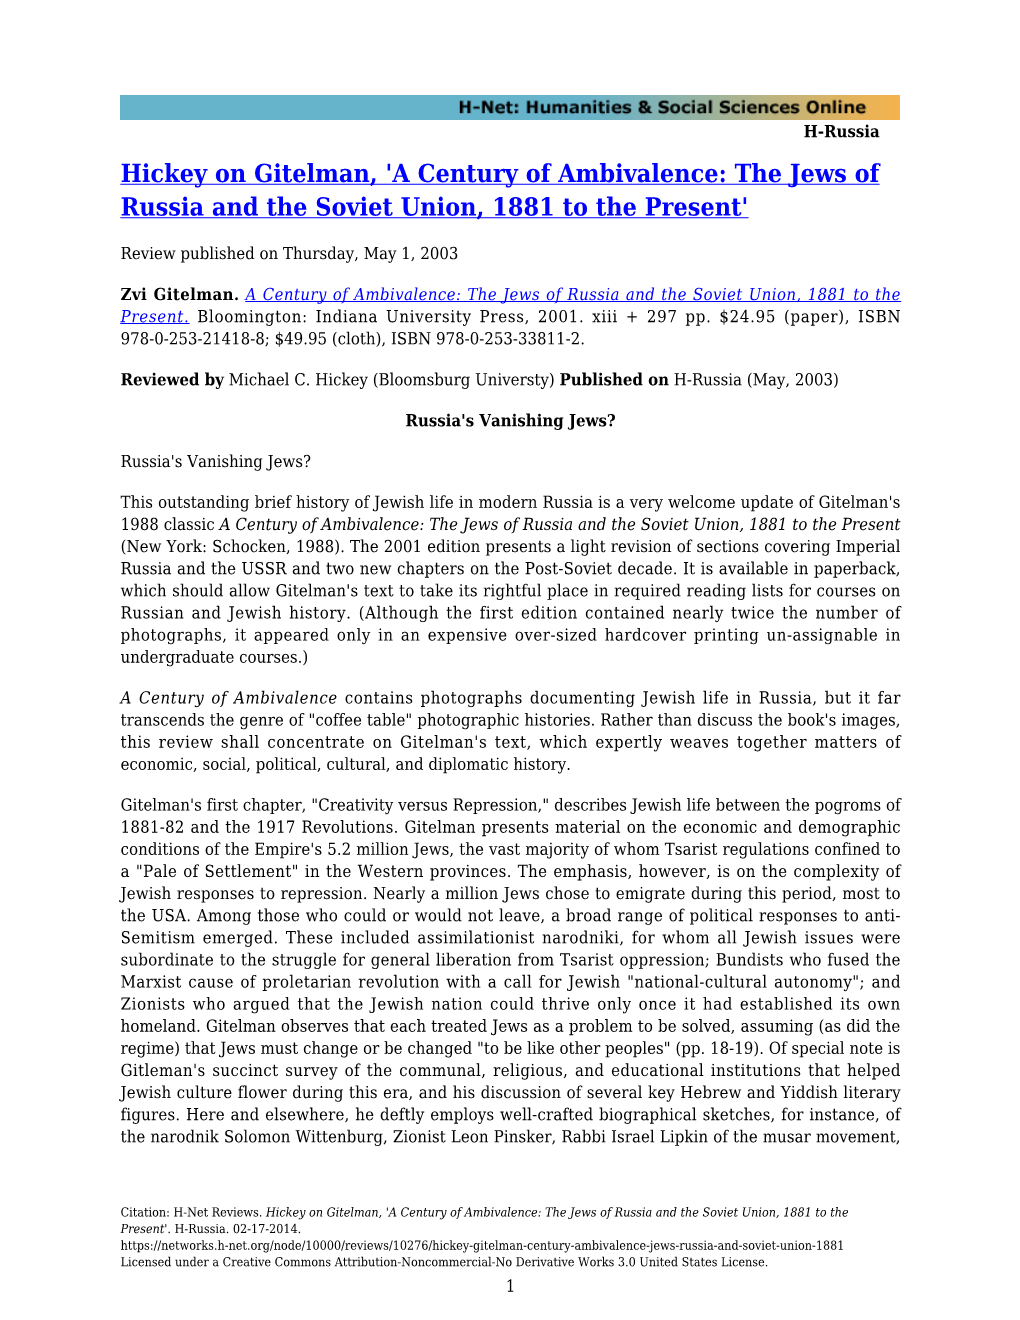 A Century of Ambivalence: the Jews of Russia and the Soviet Union, 1881 to the Present'